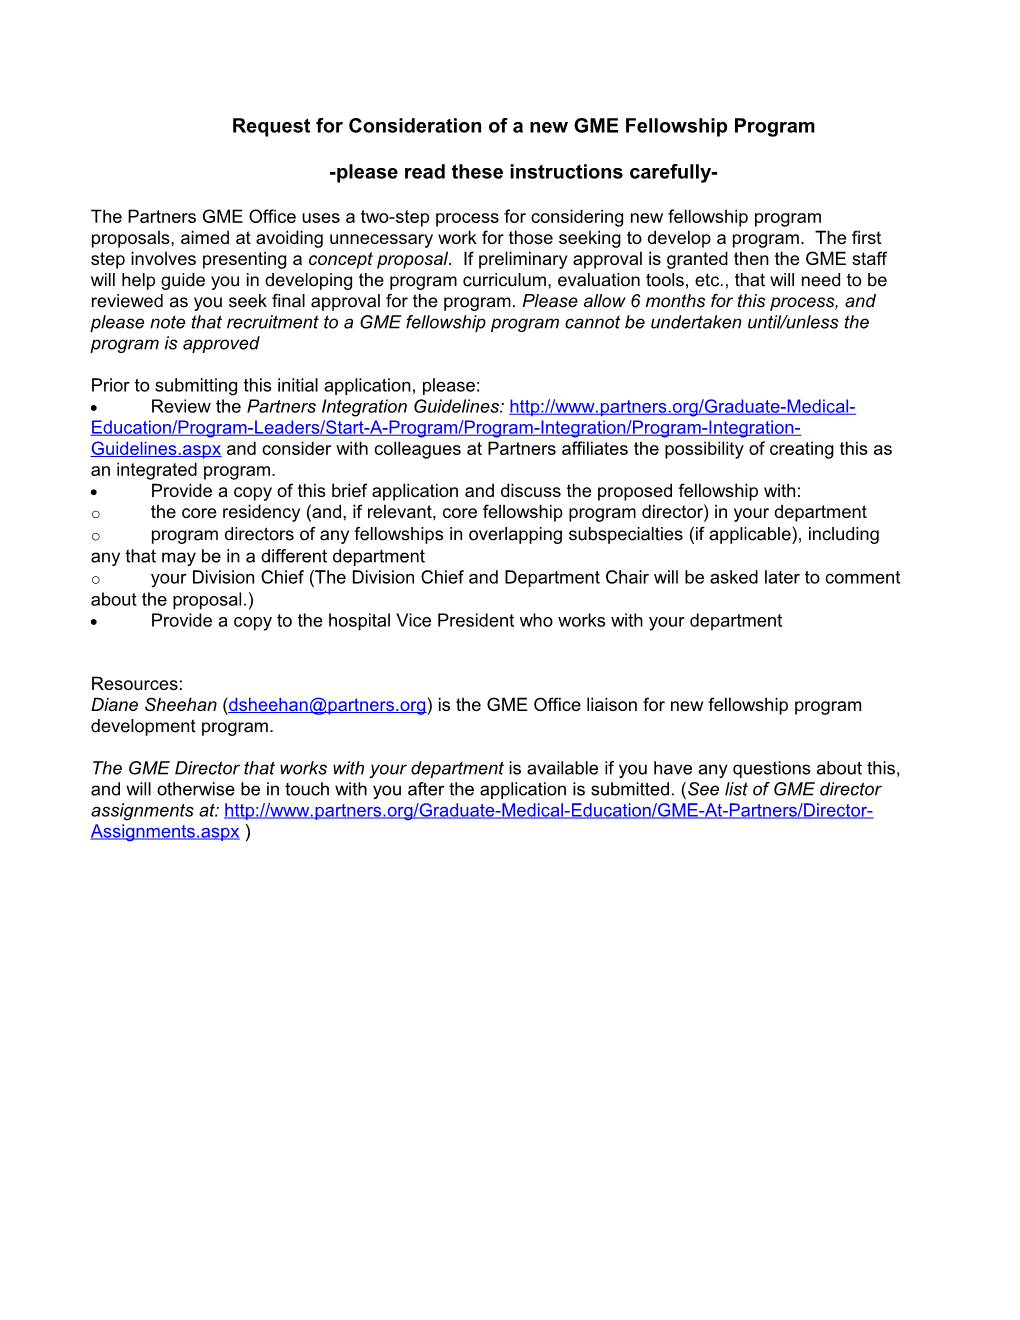 Request for Considerationof a New GME Fellowship Program